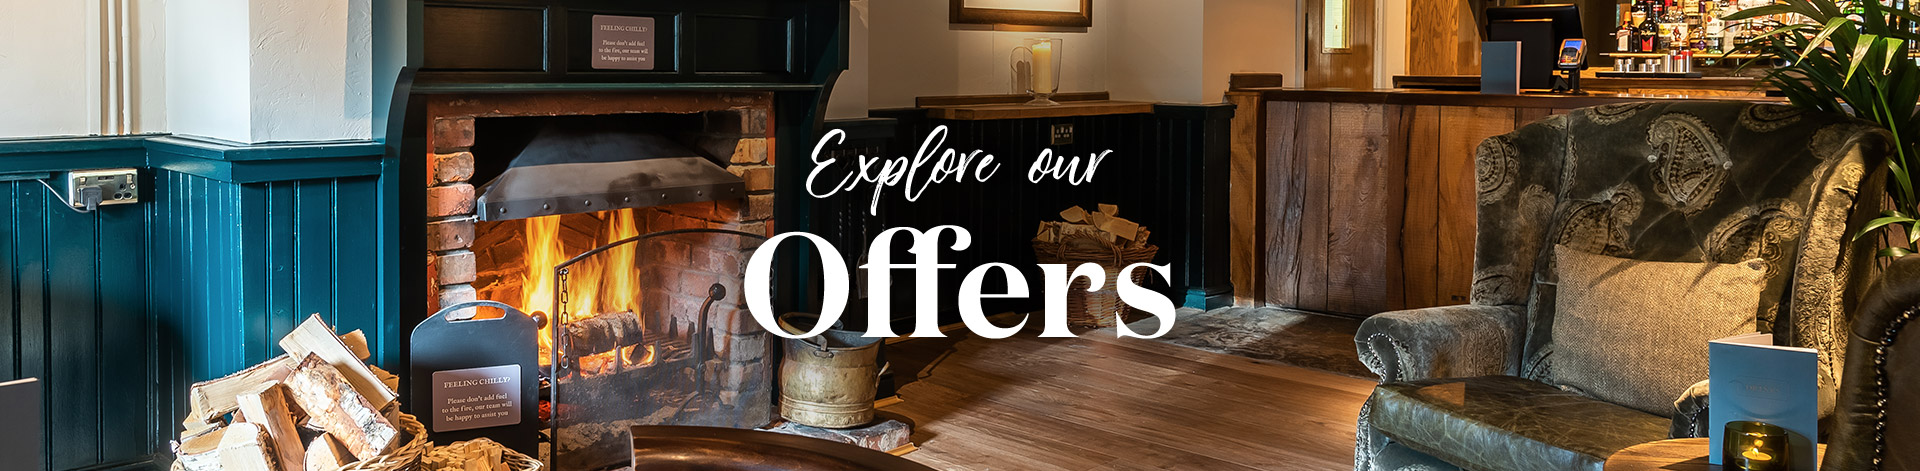 Our latest offers at The Five Bells